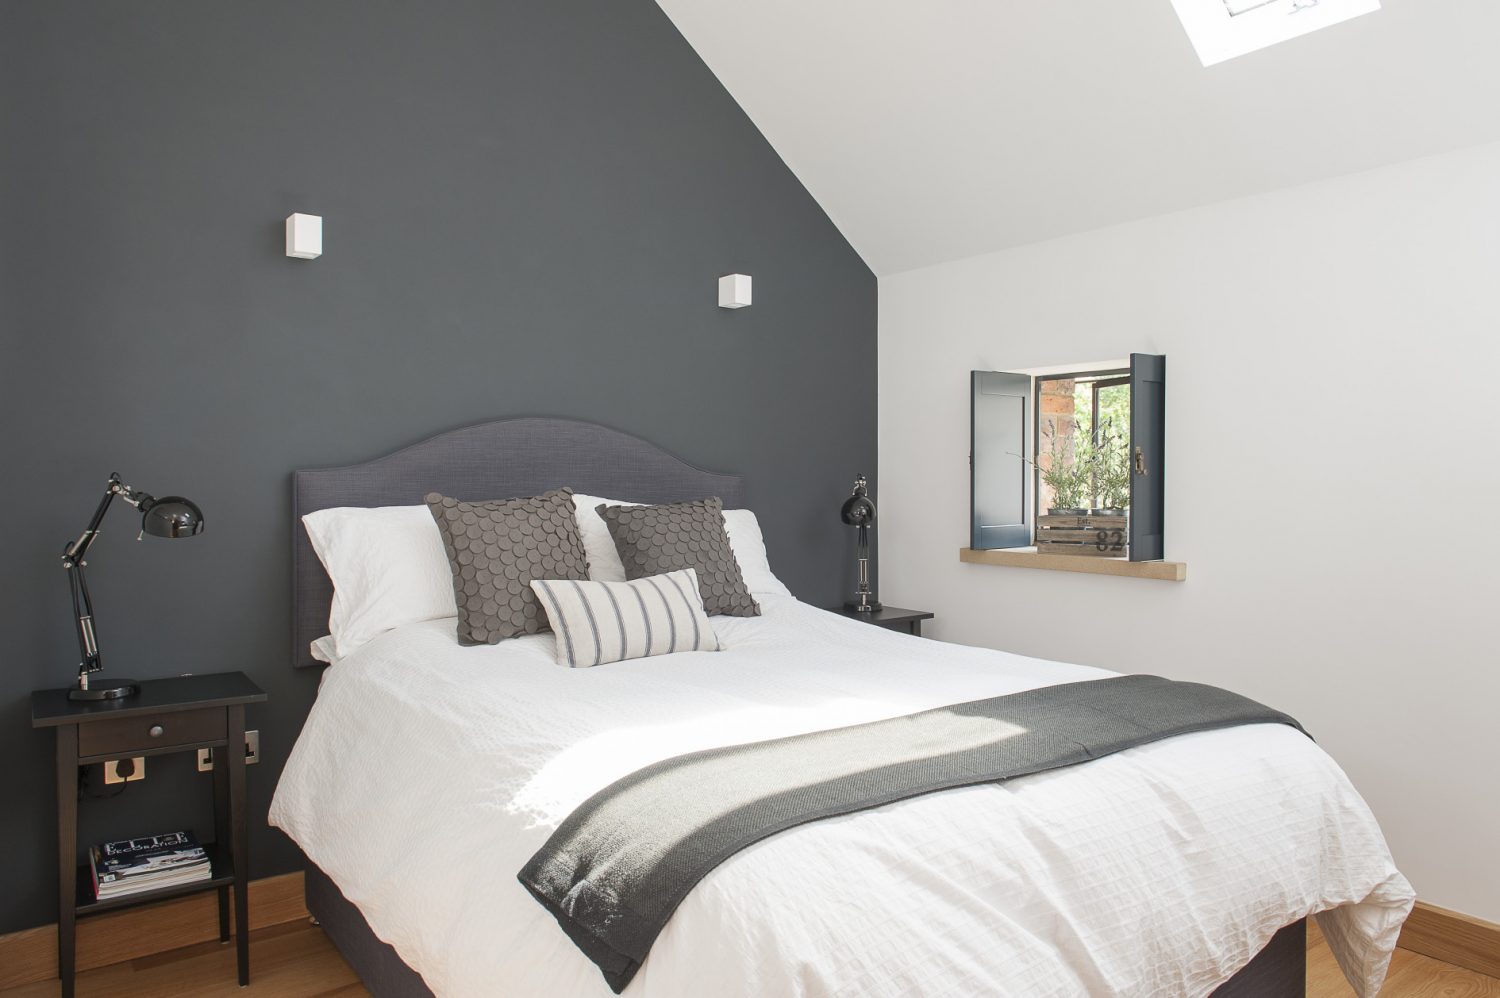 The second guest room, painted a deep grey, is a pleasing combination of contemporary minimalism with a dash of country charm – the latter provided by a pretty shuttered window